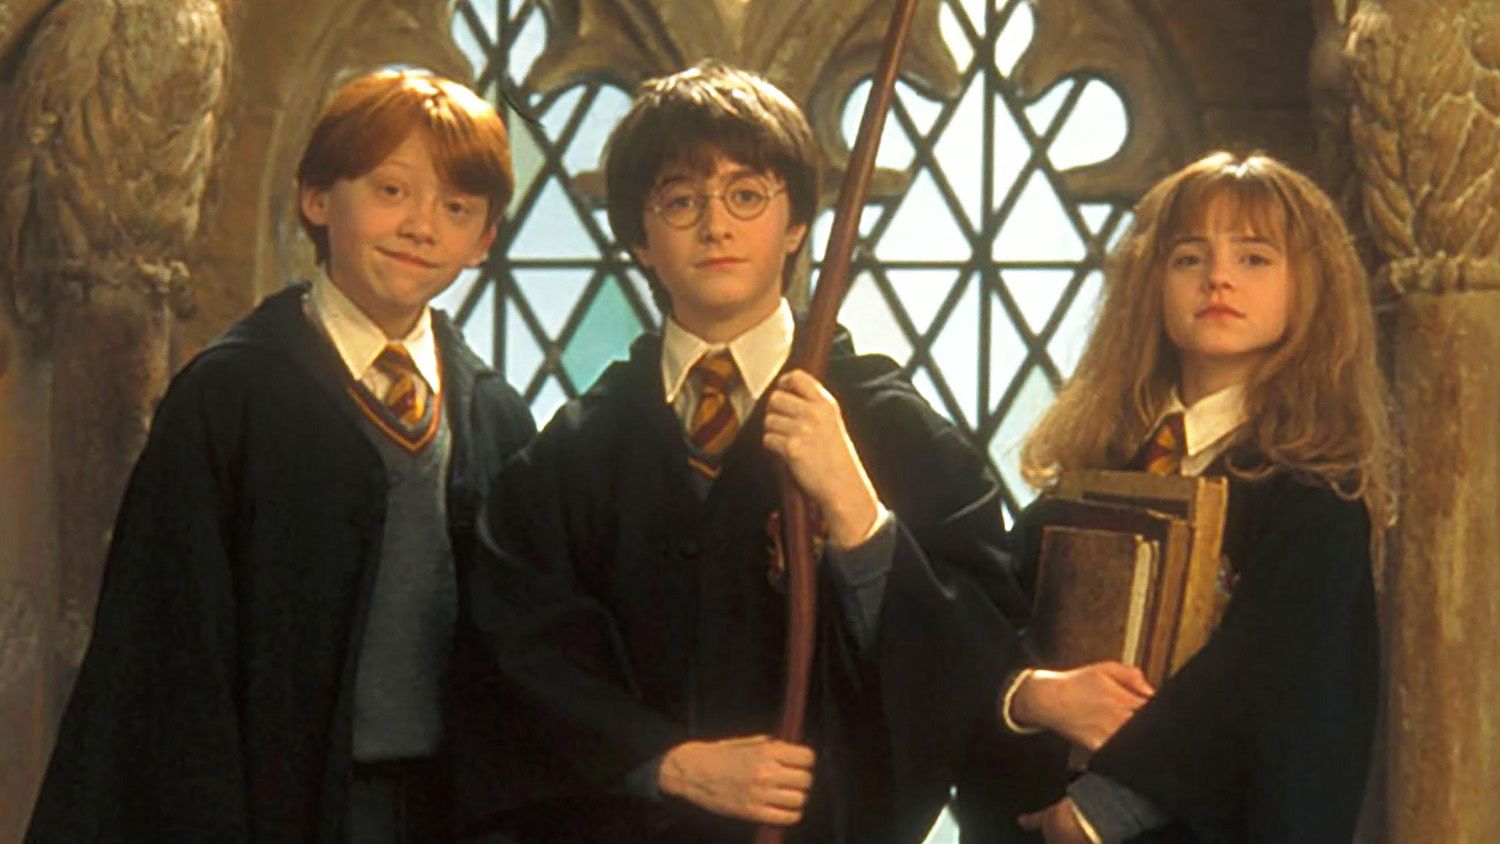 Harry Potter: A TV adaptation is in the works at HBO